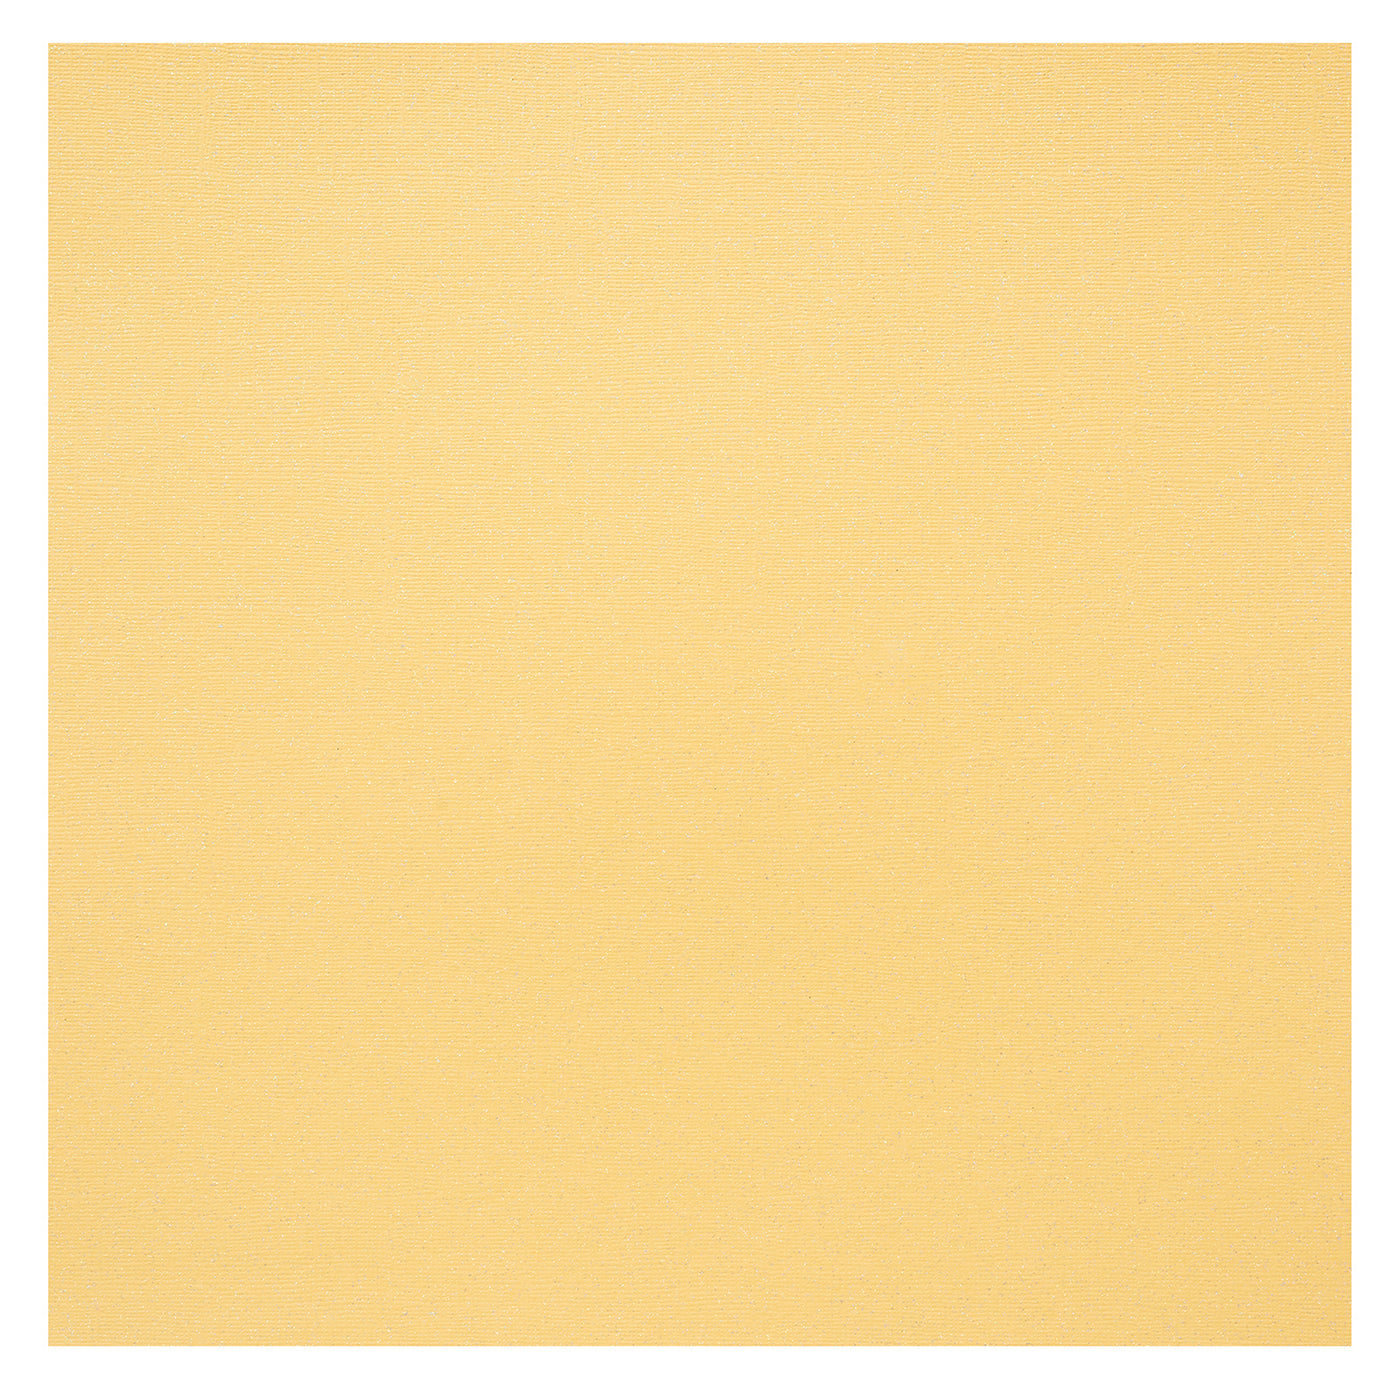 FIVE STAR - 12x12 Yellow Glittered Cardstock by Core'dinations- 80 lb Paper